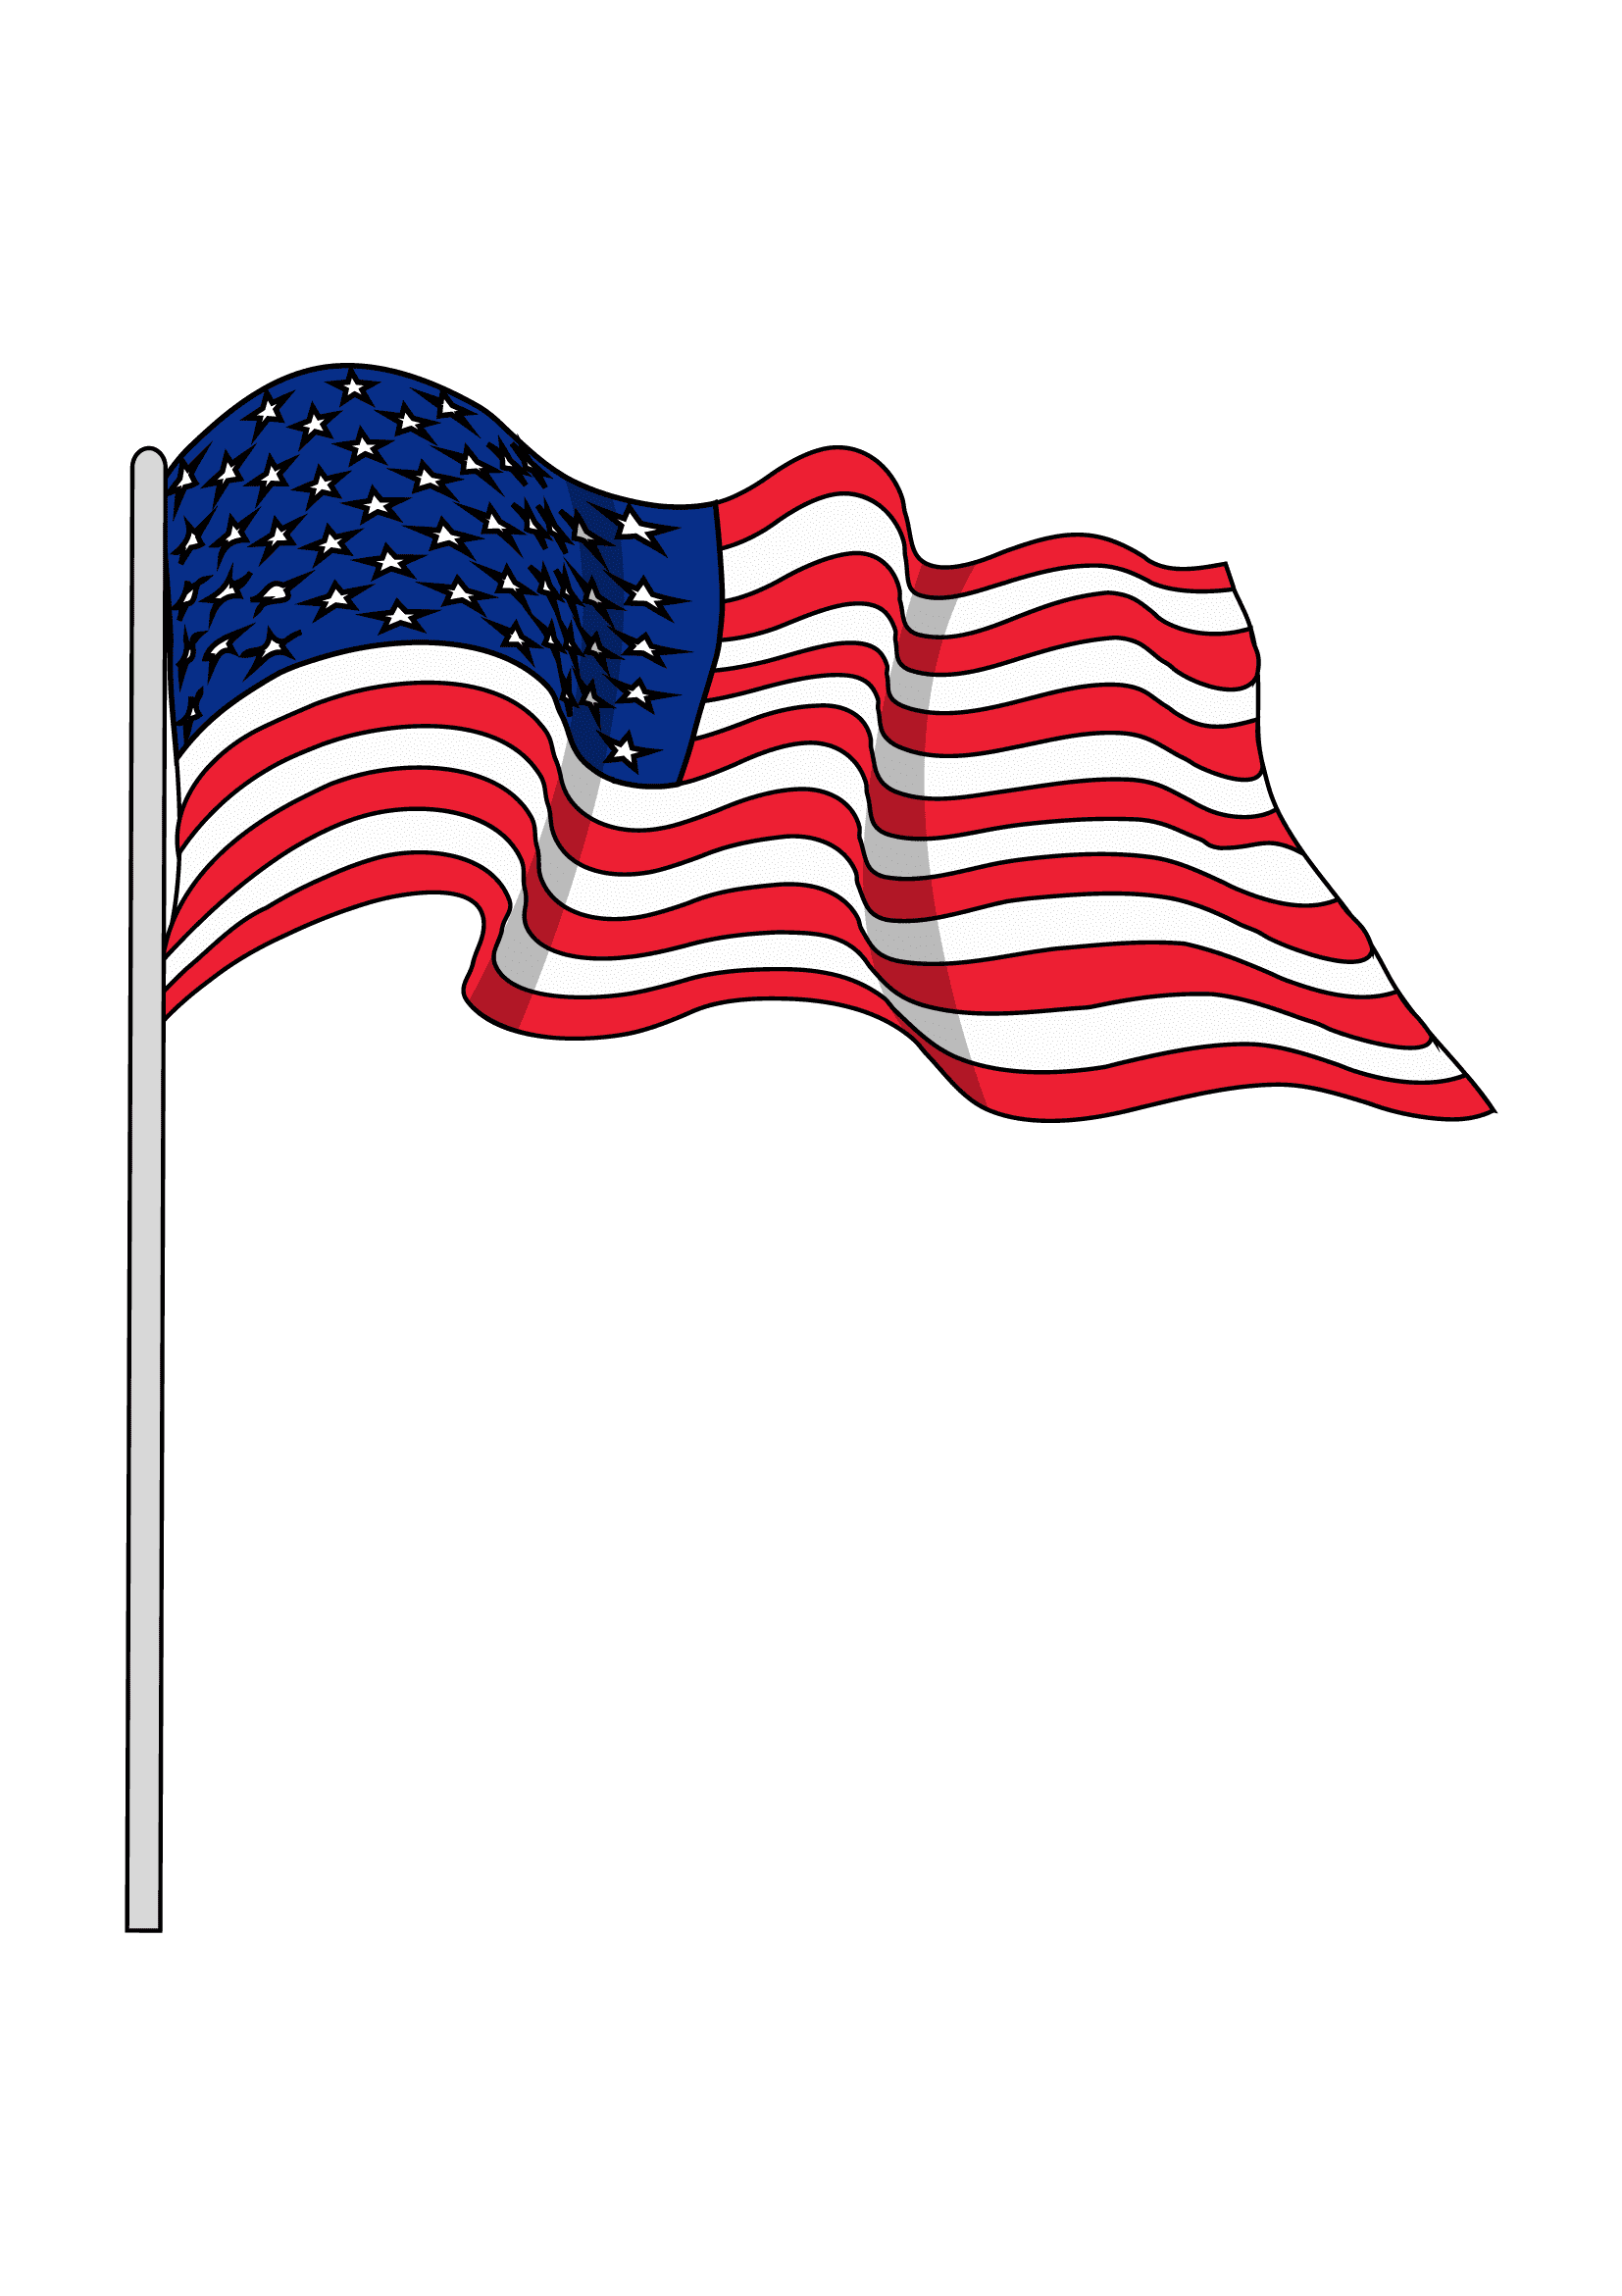 How to Draw The American Flag Step by Step